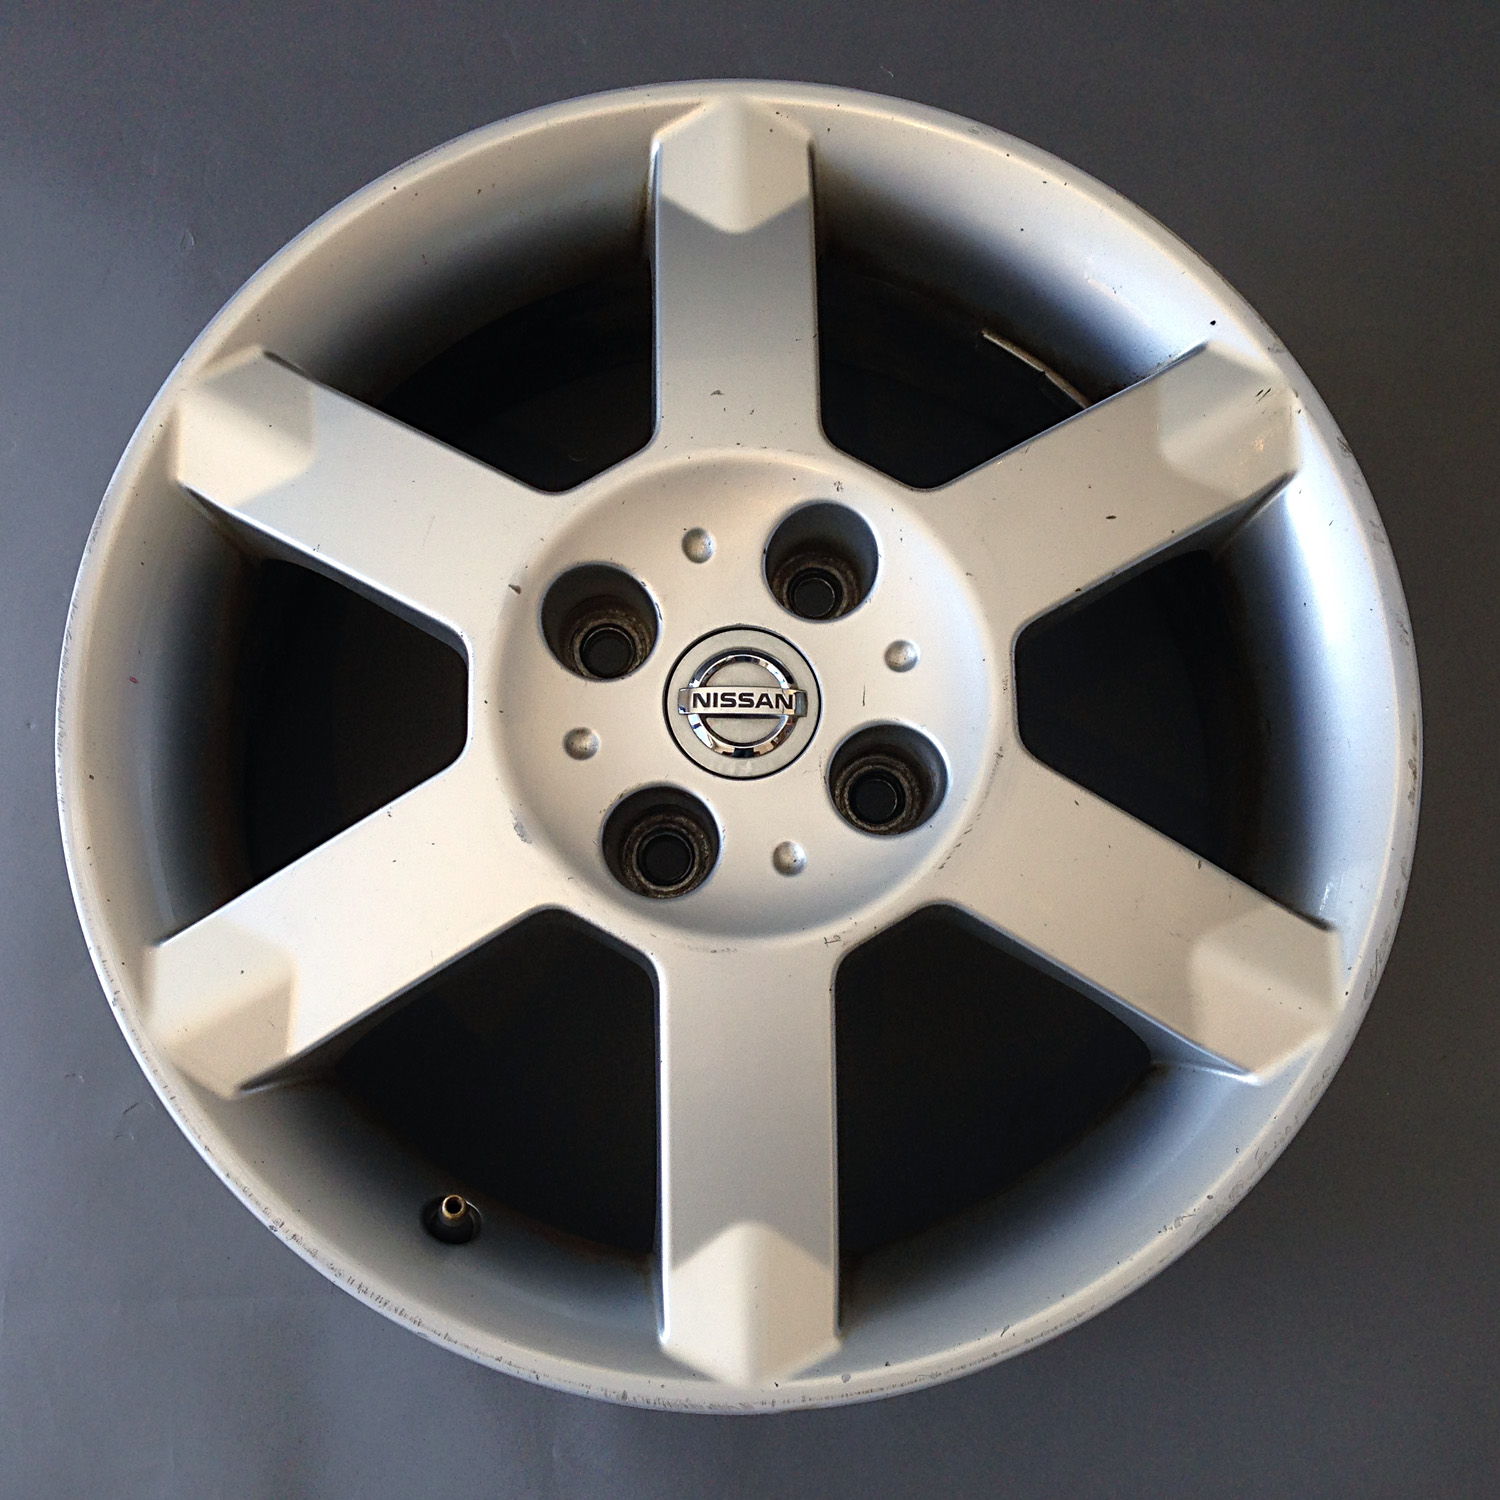 18 Inch rims for nissan sentra